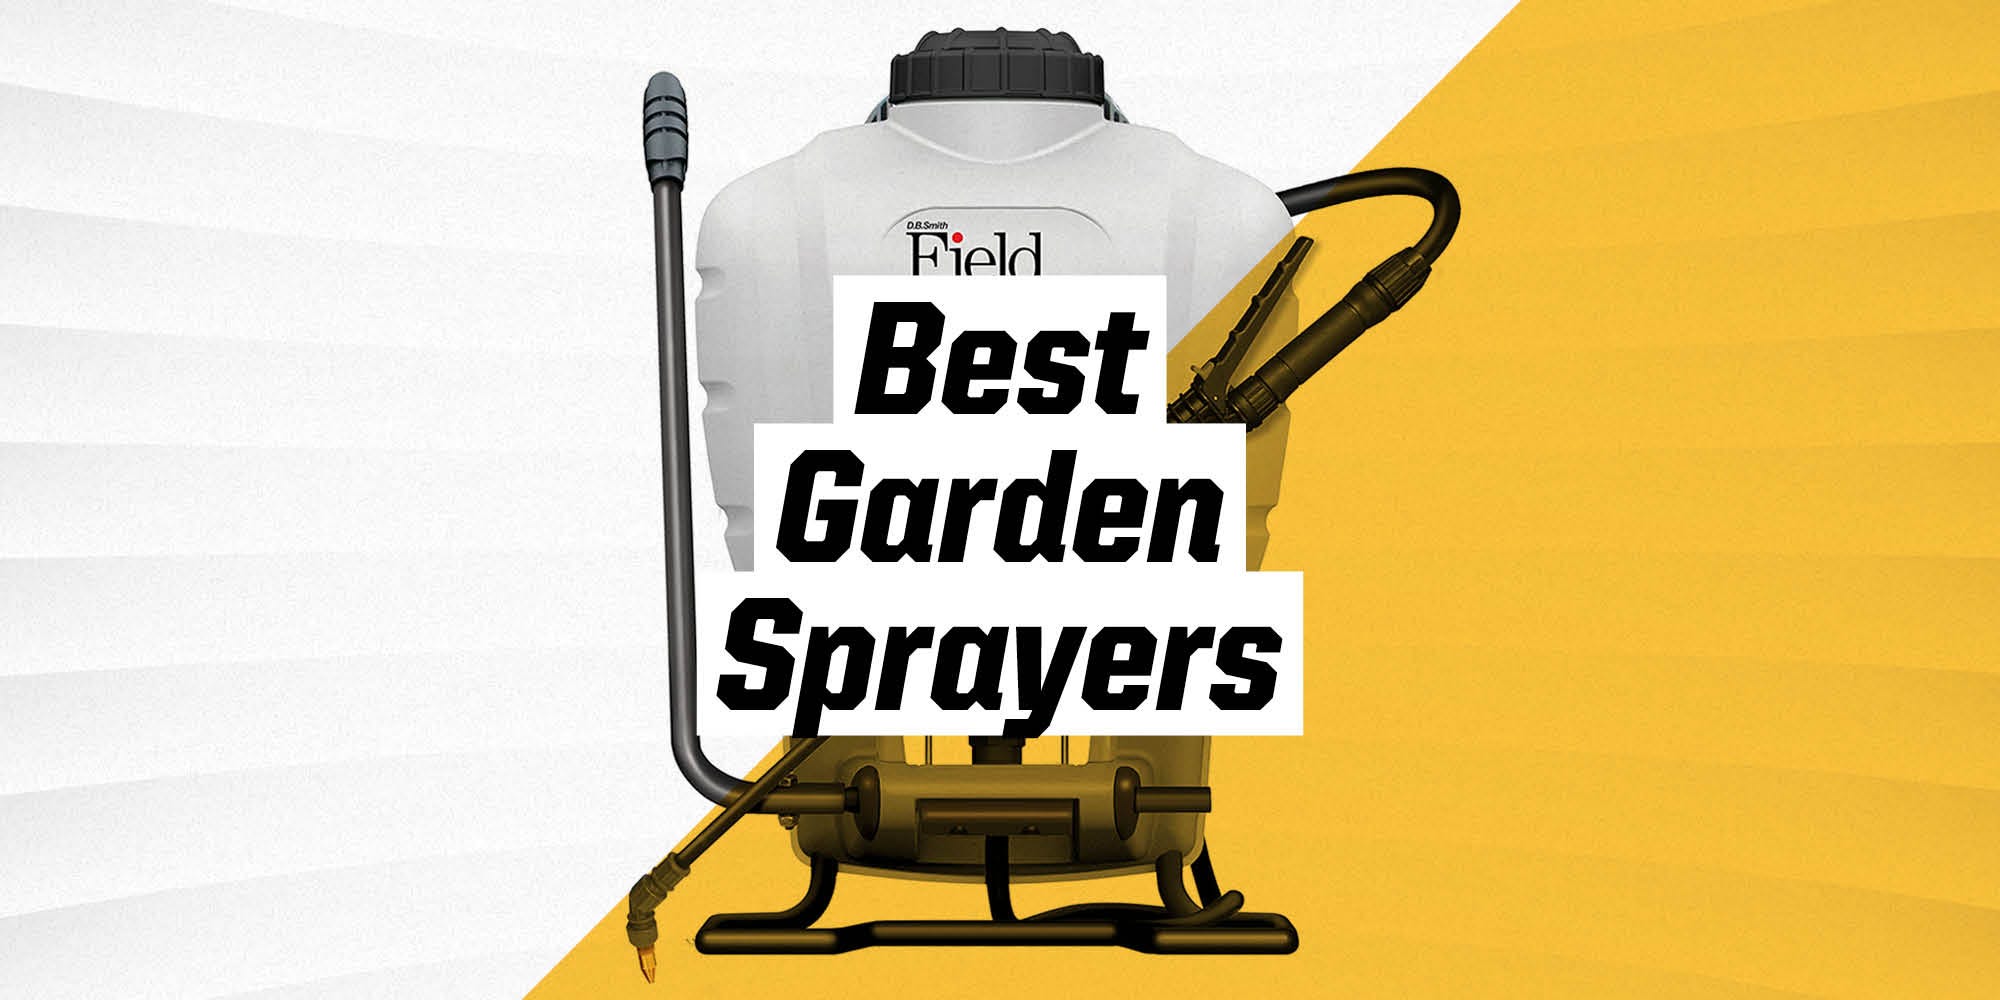 Keep Your Yard Looking Its Best With These Top-Rated Garden Sprayers